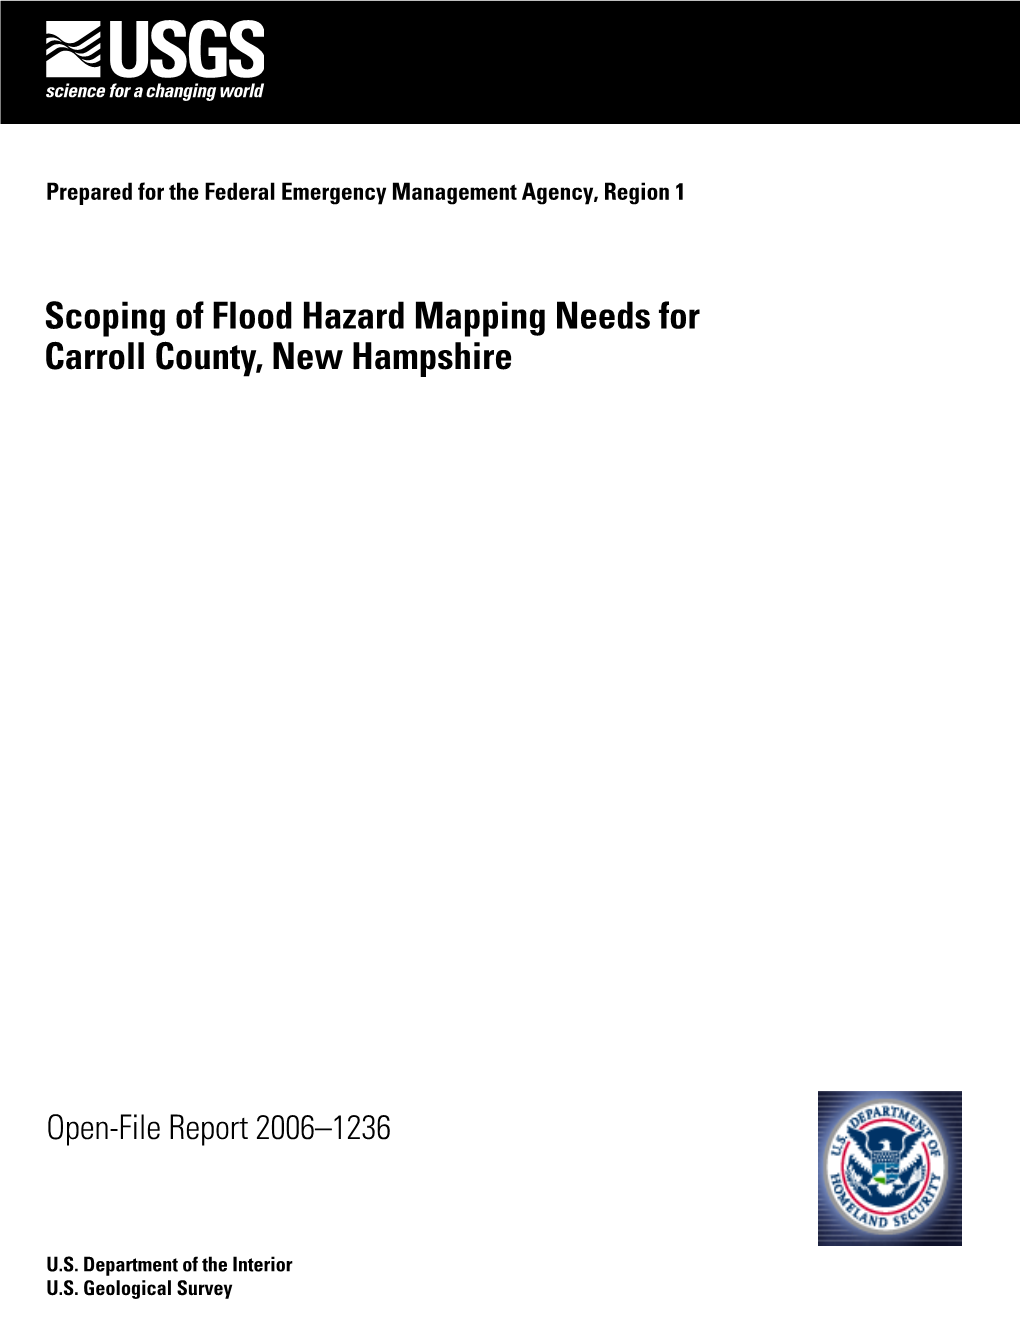 Scoping of Flood Hazard Mapping Needs for Carroll County, New Hampshire— New County, for Carroll Needs Hazard Mapping of Flood —Scoping